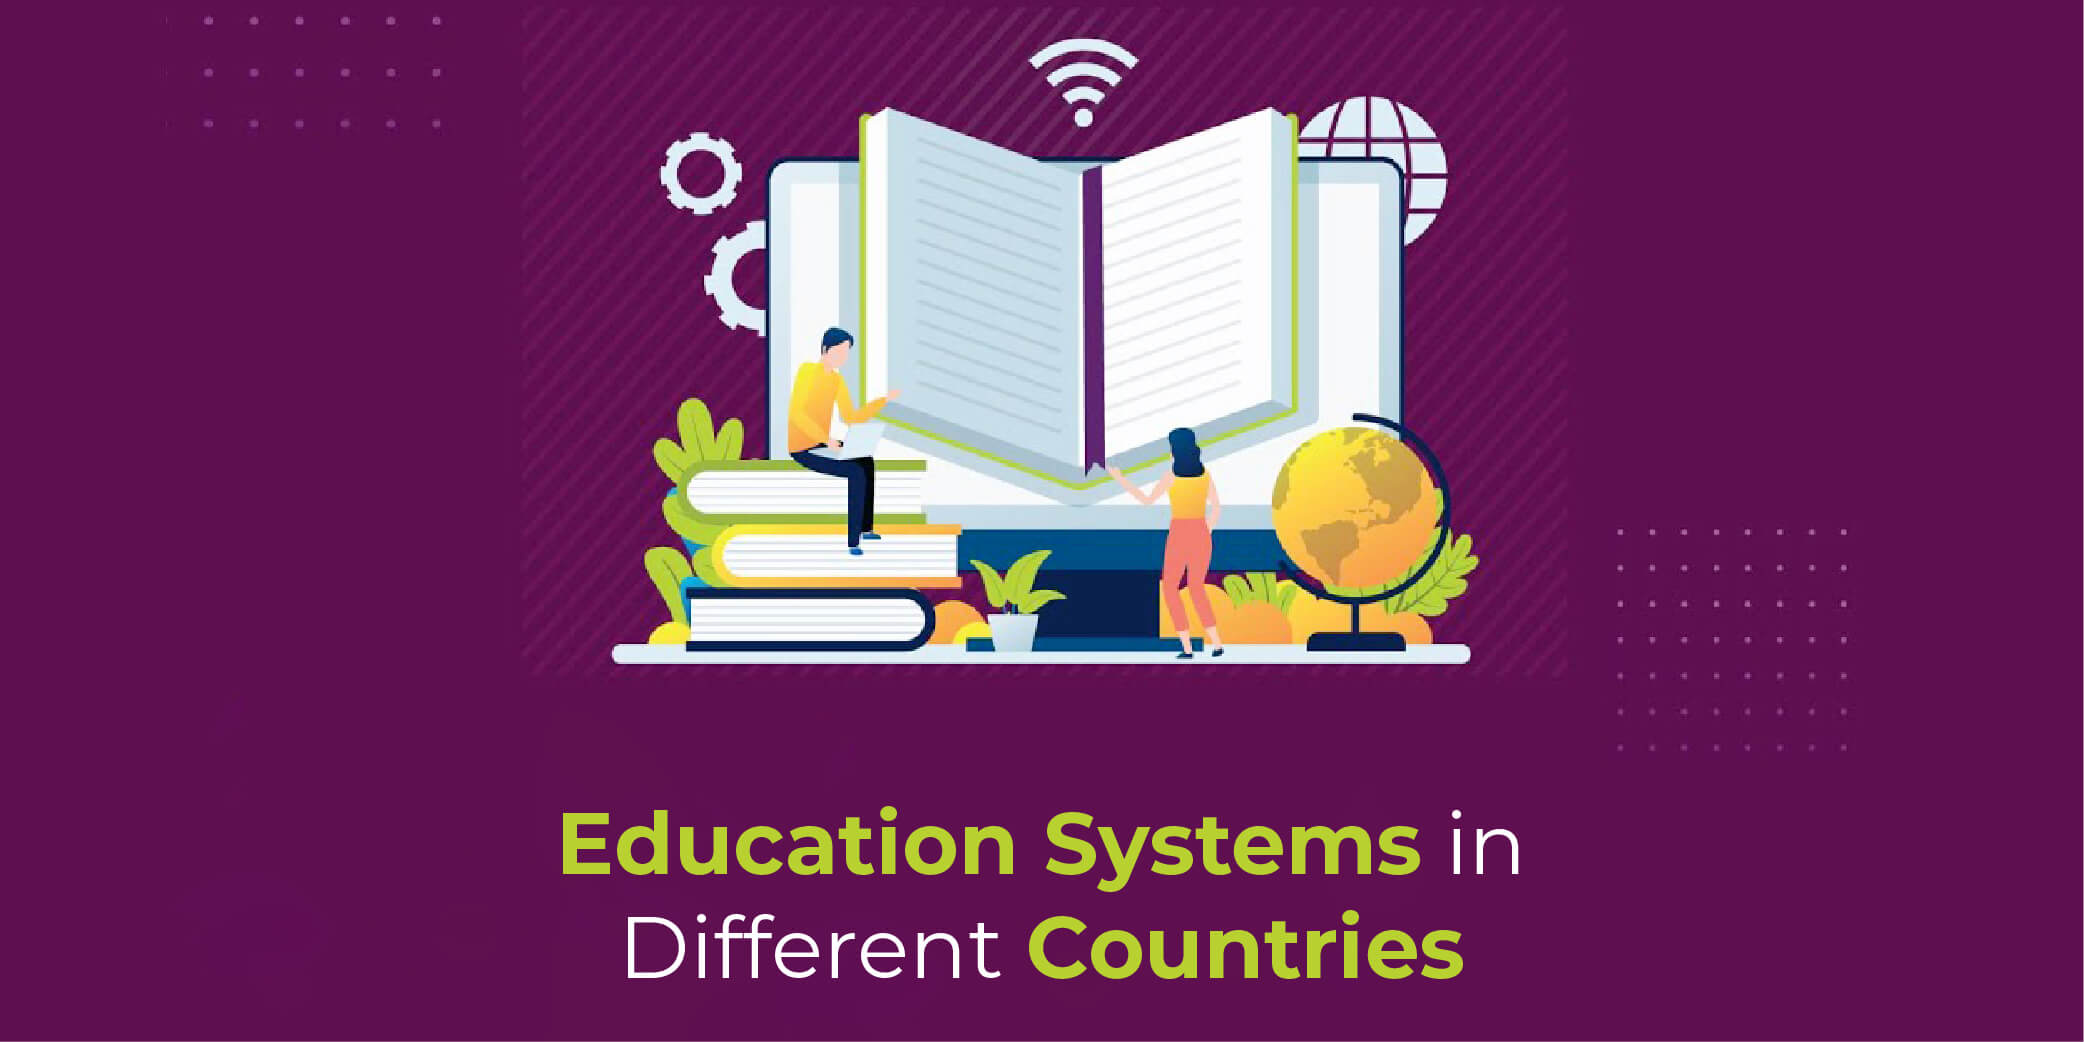 Education Systems in Different Countries